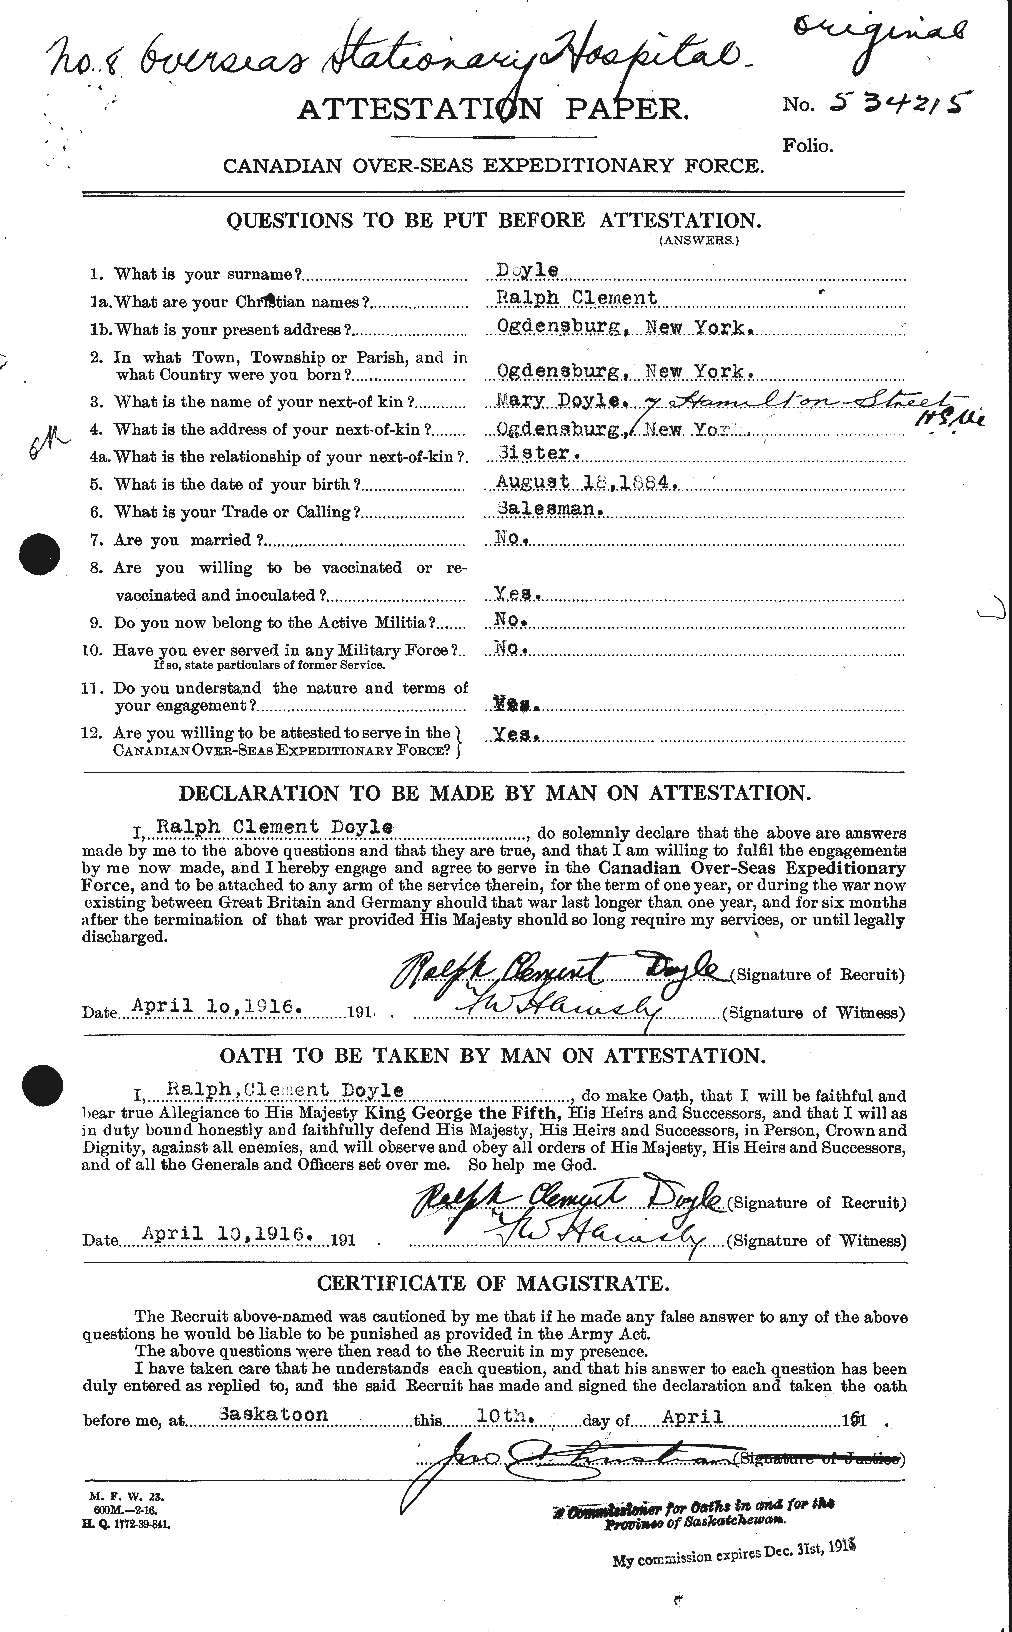 Personnel Records of the First World War - CEF 298691a